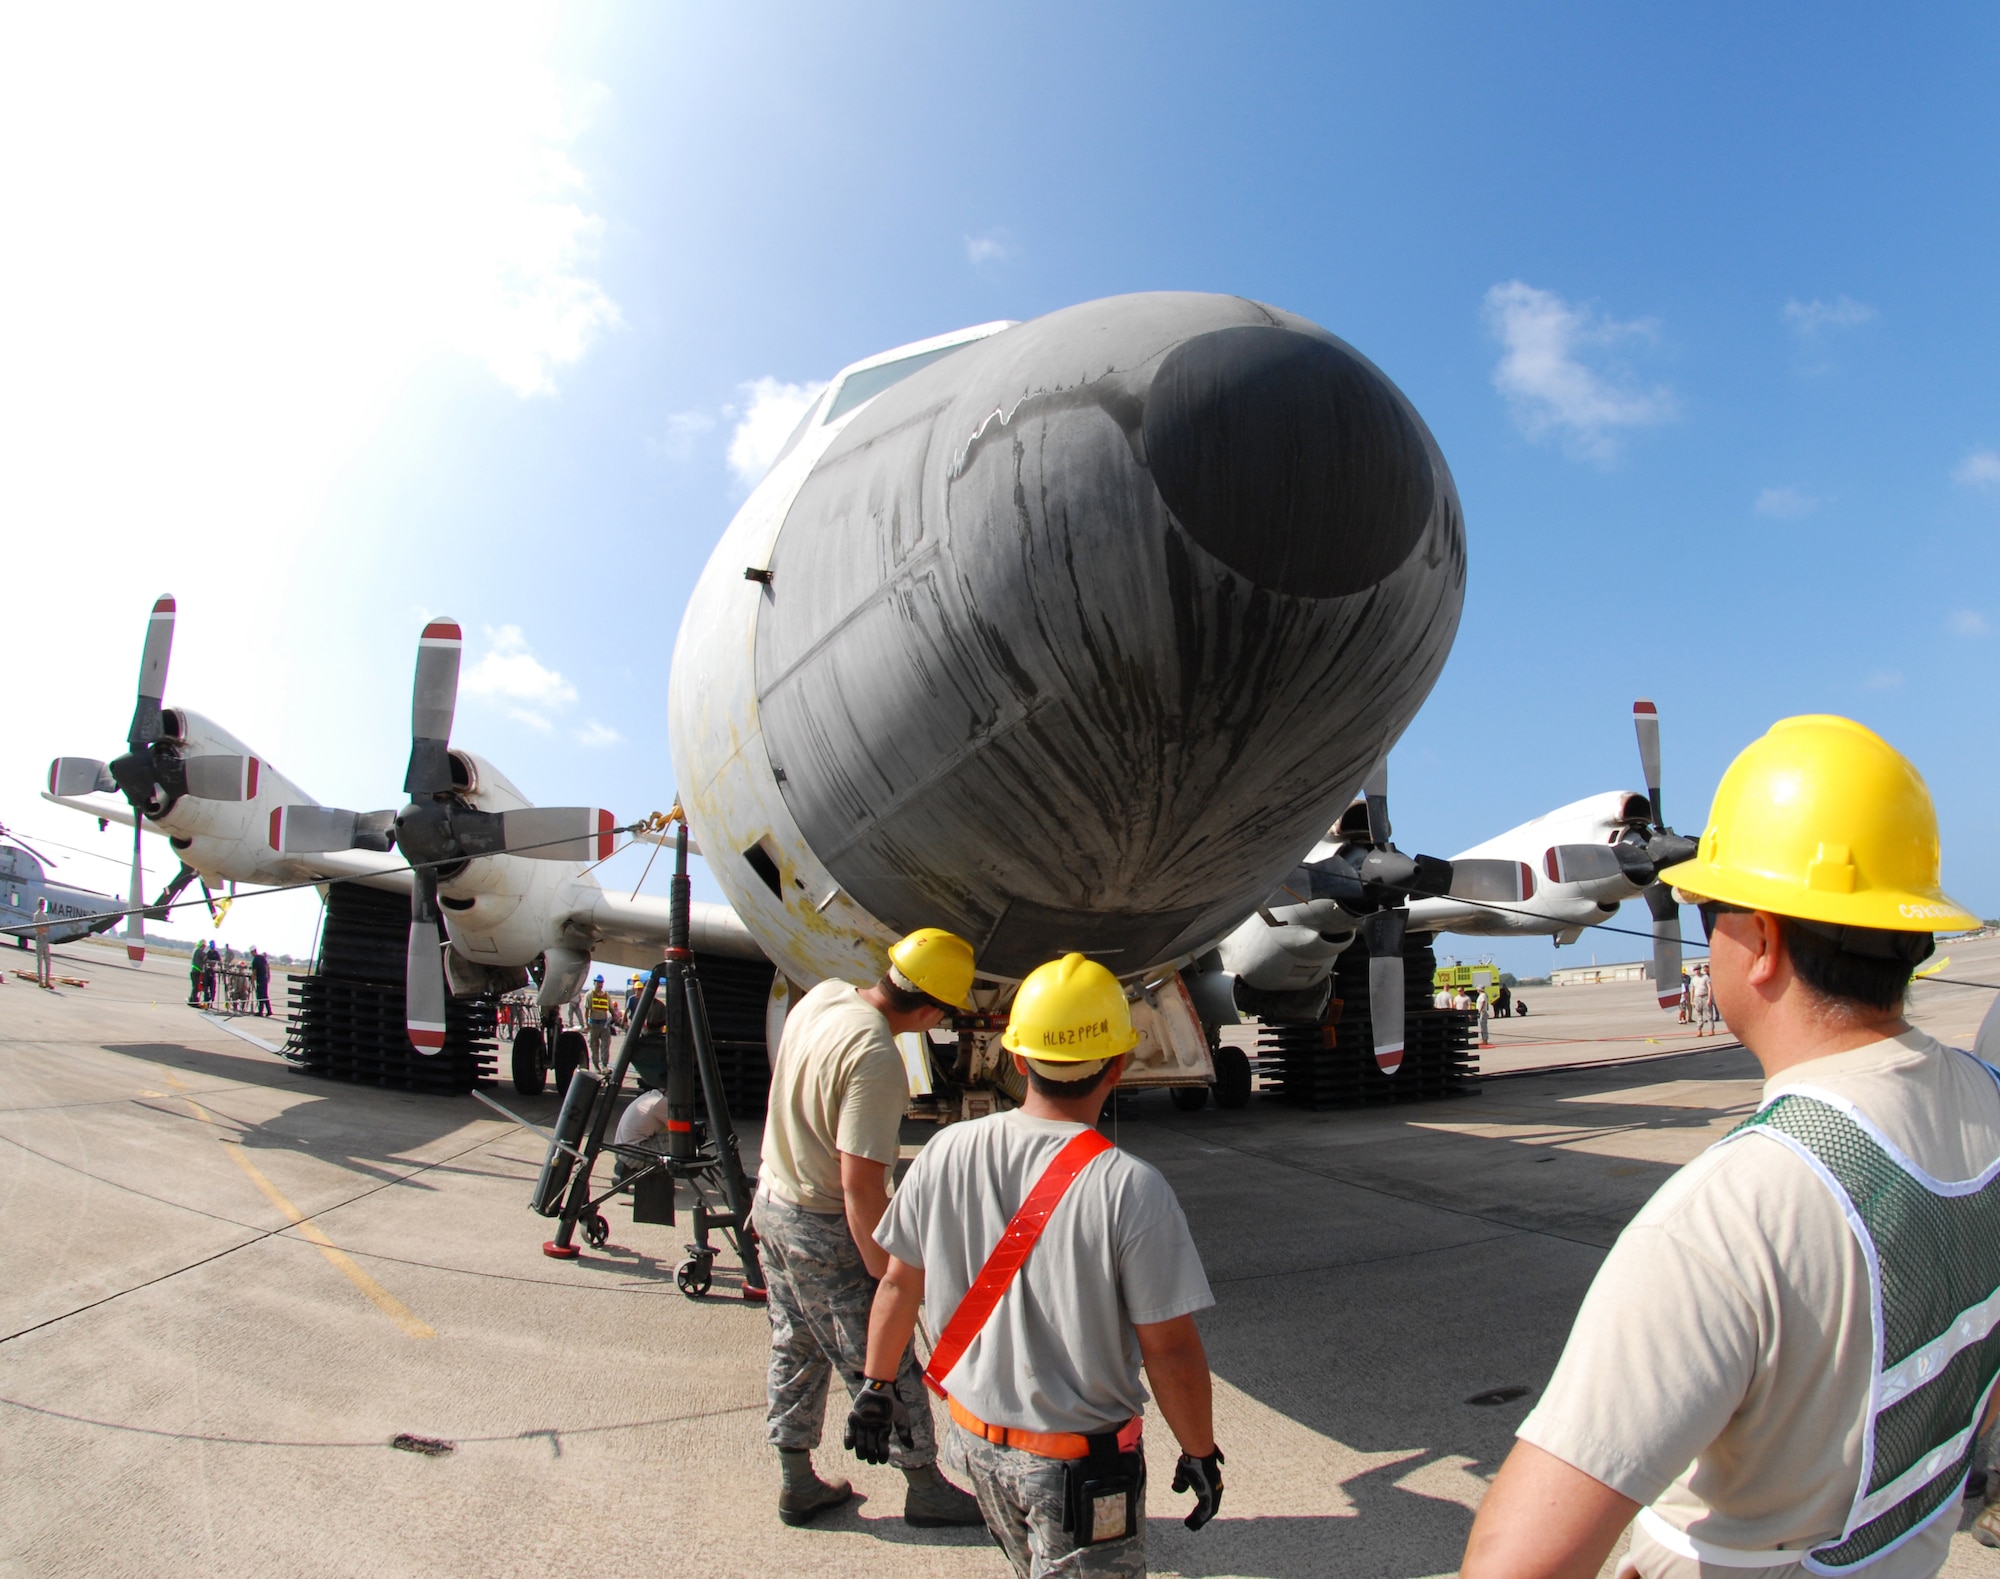 Airmen from the Hawaii Air National Guard 154th Maintenance Squadron and active duty 15th Maintenance Squadron inspect a lifted P-3 Orion aircraft during a Crash, Damaged, Disabled Aircraft Recovery training exercise, Jan. 27, 2016, Kalealoa, Hawaii. Team members utilized a system of specialized air bags and tethering cables to raise the simulated disabled aircraft. CDDAR teams are tasked with safely removing disabled aircraft from areas that interfere with flight operations. (U.S. Air National Guard photo by Senior Airman Orlando Corpuz/released)